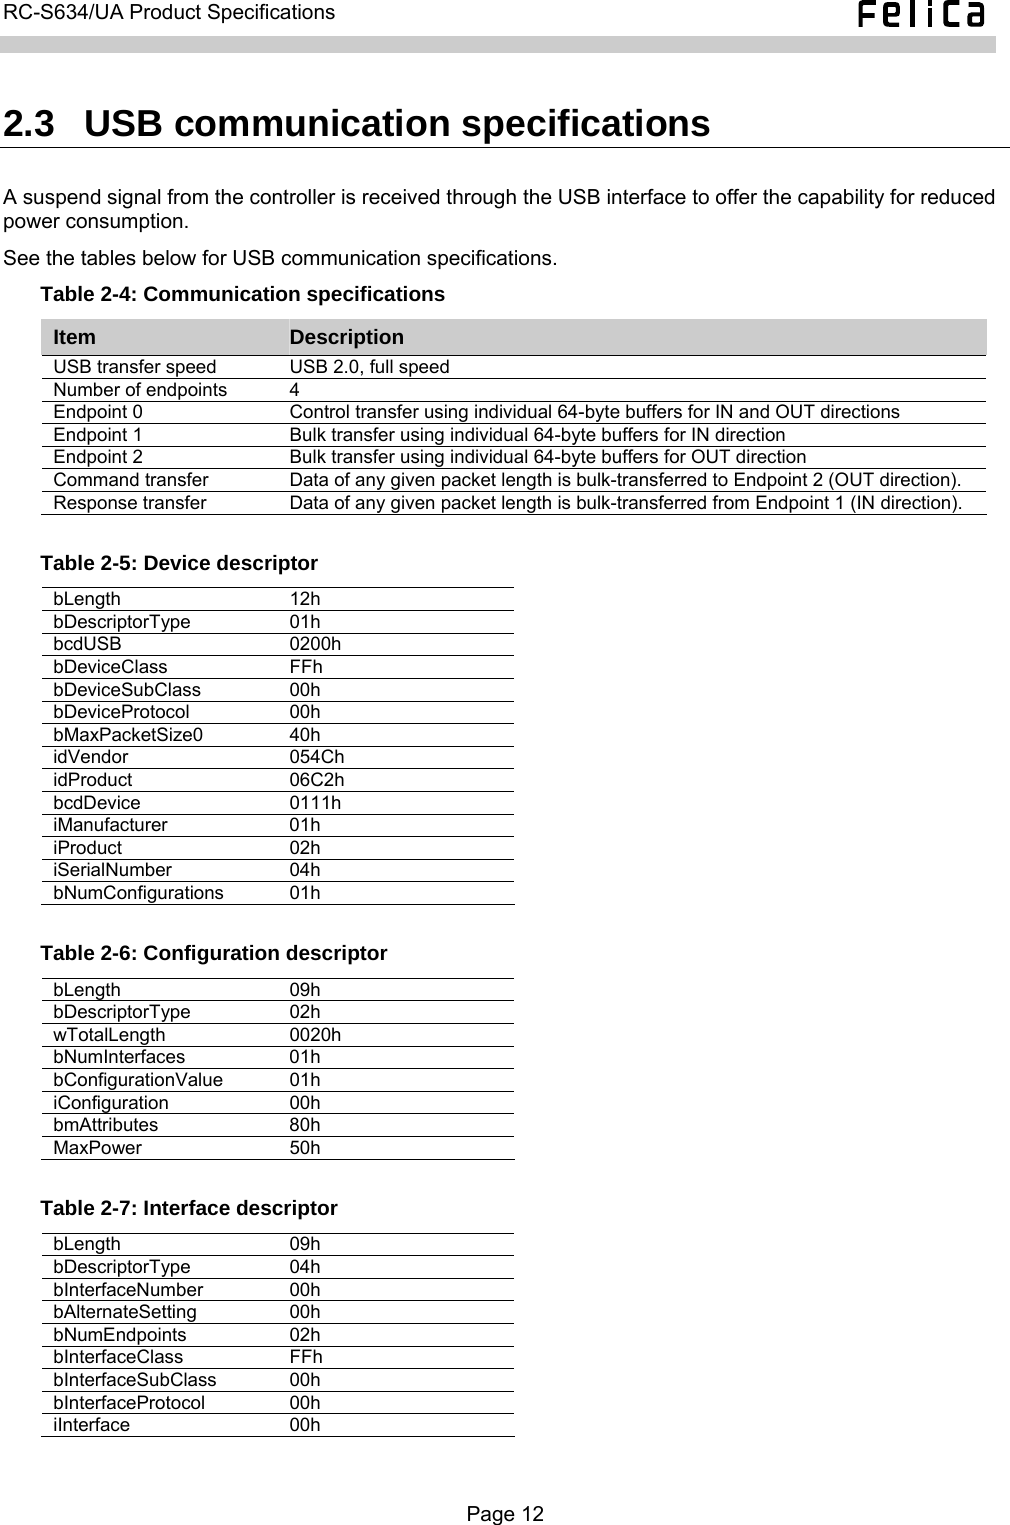   RC-S634/UA Product Specifications  2.3  USB communication specifications A suspend signal from the controller is received through the USB interface to offer the capability for reduced power consumption. See the tables below for USB communication specifications. Table 2-4: Communication specifications Item  Description USB transfer speed  USB 2.0, full speed Number of endpoints  4 Endpoint 0  Control transfer using individual 64-byte buffers for IN and OUT directions Endpoint 1  Bulk transfer using individual 64-byte buffers for IN direction Endpoint 2  Bulk transfer using individual 64-byte buffers for OUT direction Command transfer  Data of any given packet length is bulk-transferred to Endpoint 2 (OUT direction). Response transfer  Data of any given packet length is bulk-transferred from Endpoint 1 (IN direction).  Table 2-5: Device descriptor bLength 12h bDescriptorType 01h bcdUSB 0200h bDeviceClass FFh bDeviceSubClass 00h bDeviceProtocol 00h bMaxPacketSize0 40h idVendor 054Ch idProduct 06C2h bcdDevice 0111h iManufacturer 01h iProduct 02h iSerialNumber 04h bNumConfigurations 01h  Table 2-6: Configuration descriptor bLength 09h bDescriptorType 02h wTotalLength 0020h bNumInterfaces 01h bConfigurationValue 01h iConfiguration 00h bmAttributes 80h MaxPower 50h  Table 2-7: Interface descriptor bLength 09h bDescriptorType 04h bInterfaceNumber 00h bAlternateSetting 00h bNumEndpoints 02h bInterfaceClass FFh bInterfaceSubClass 00h bInterfaceProtocol 00h iInterface 00h   Page 12  